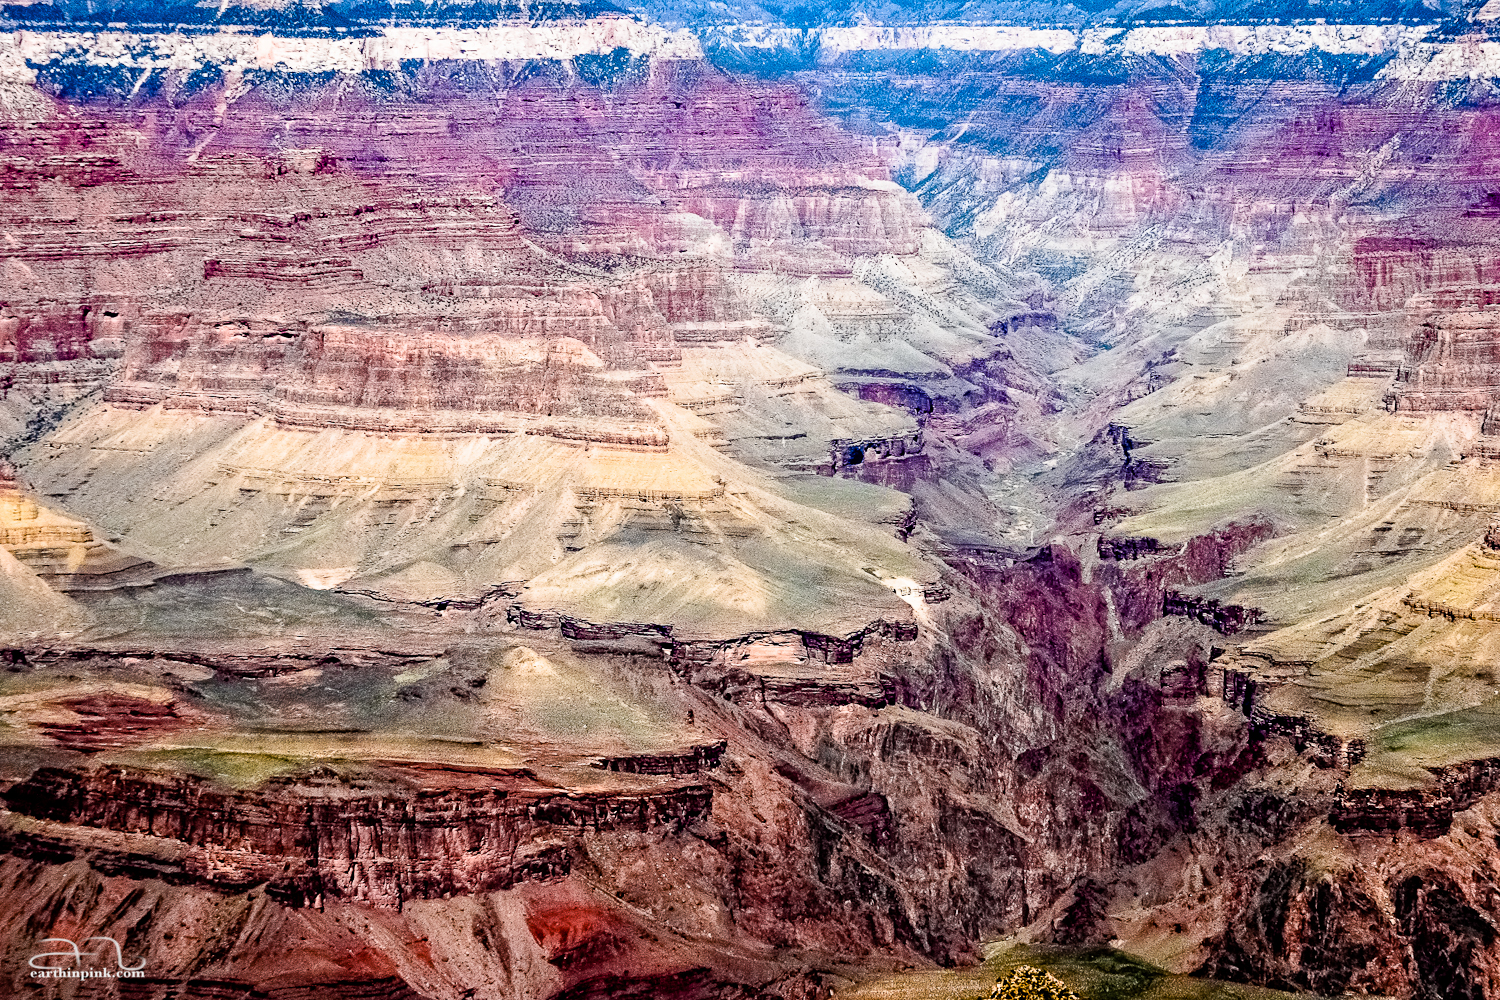 View from the south rim of Grand Canyon National Park, Arizona